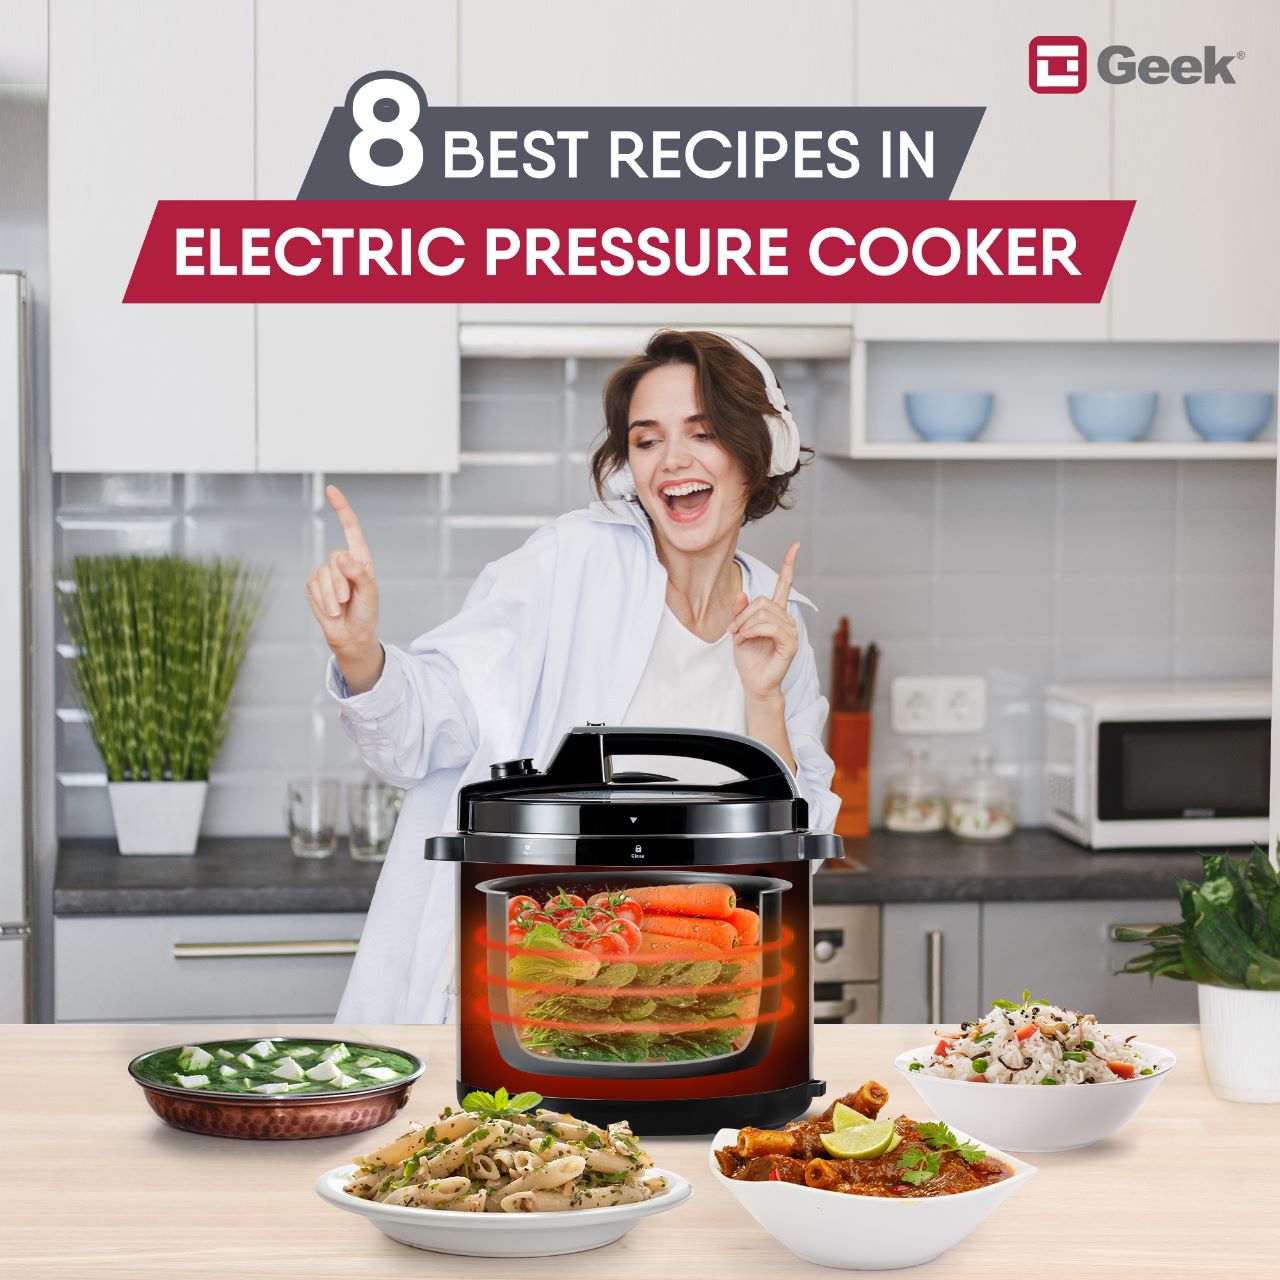 8 Quick and Easy Electric Pressure Cooker Recipes for Busy Weeknights